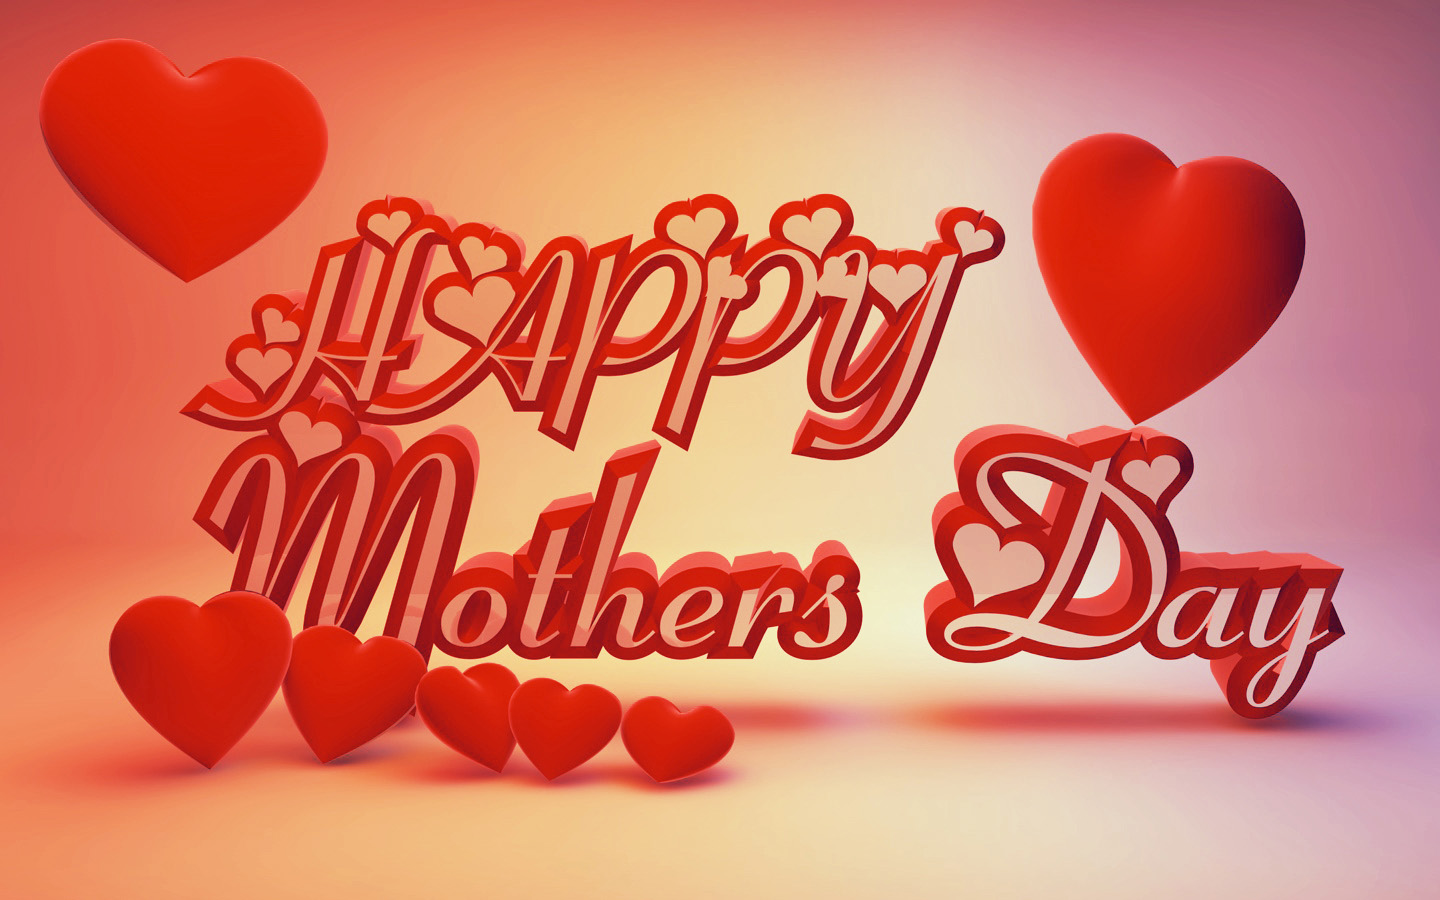 Best Happy Mothers Day Wishes Greetings Free Download